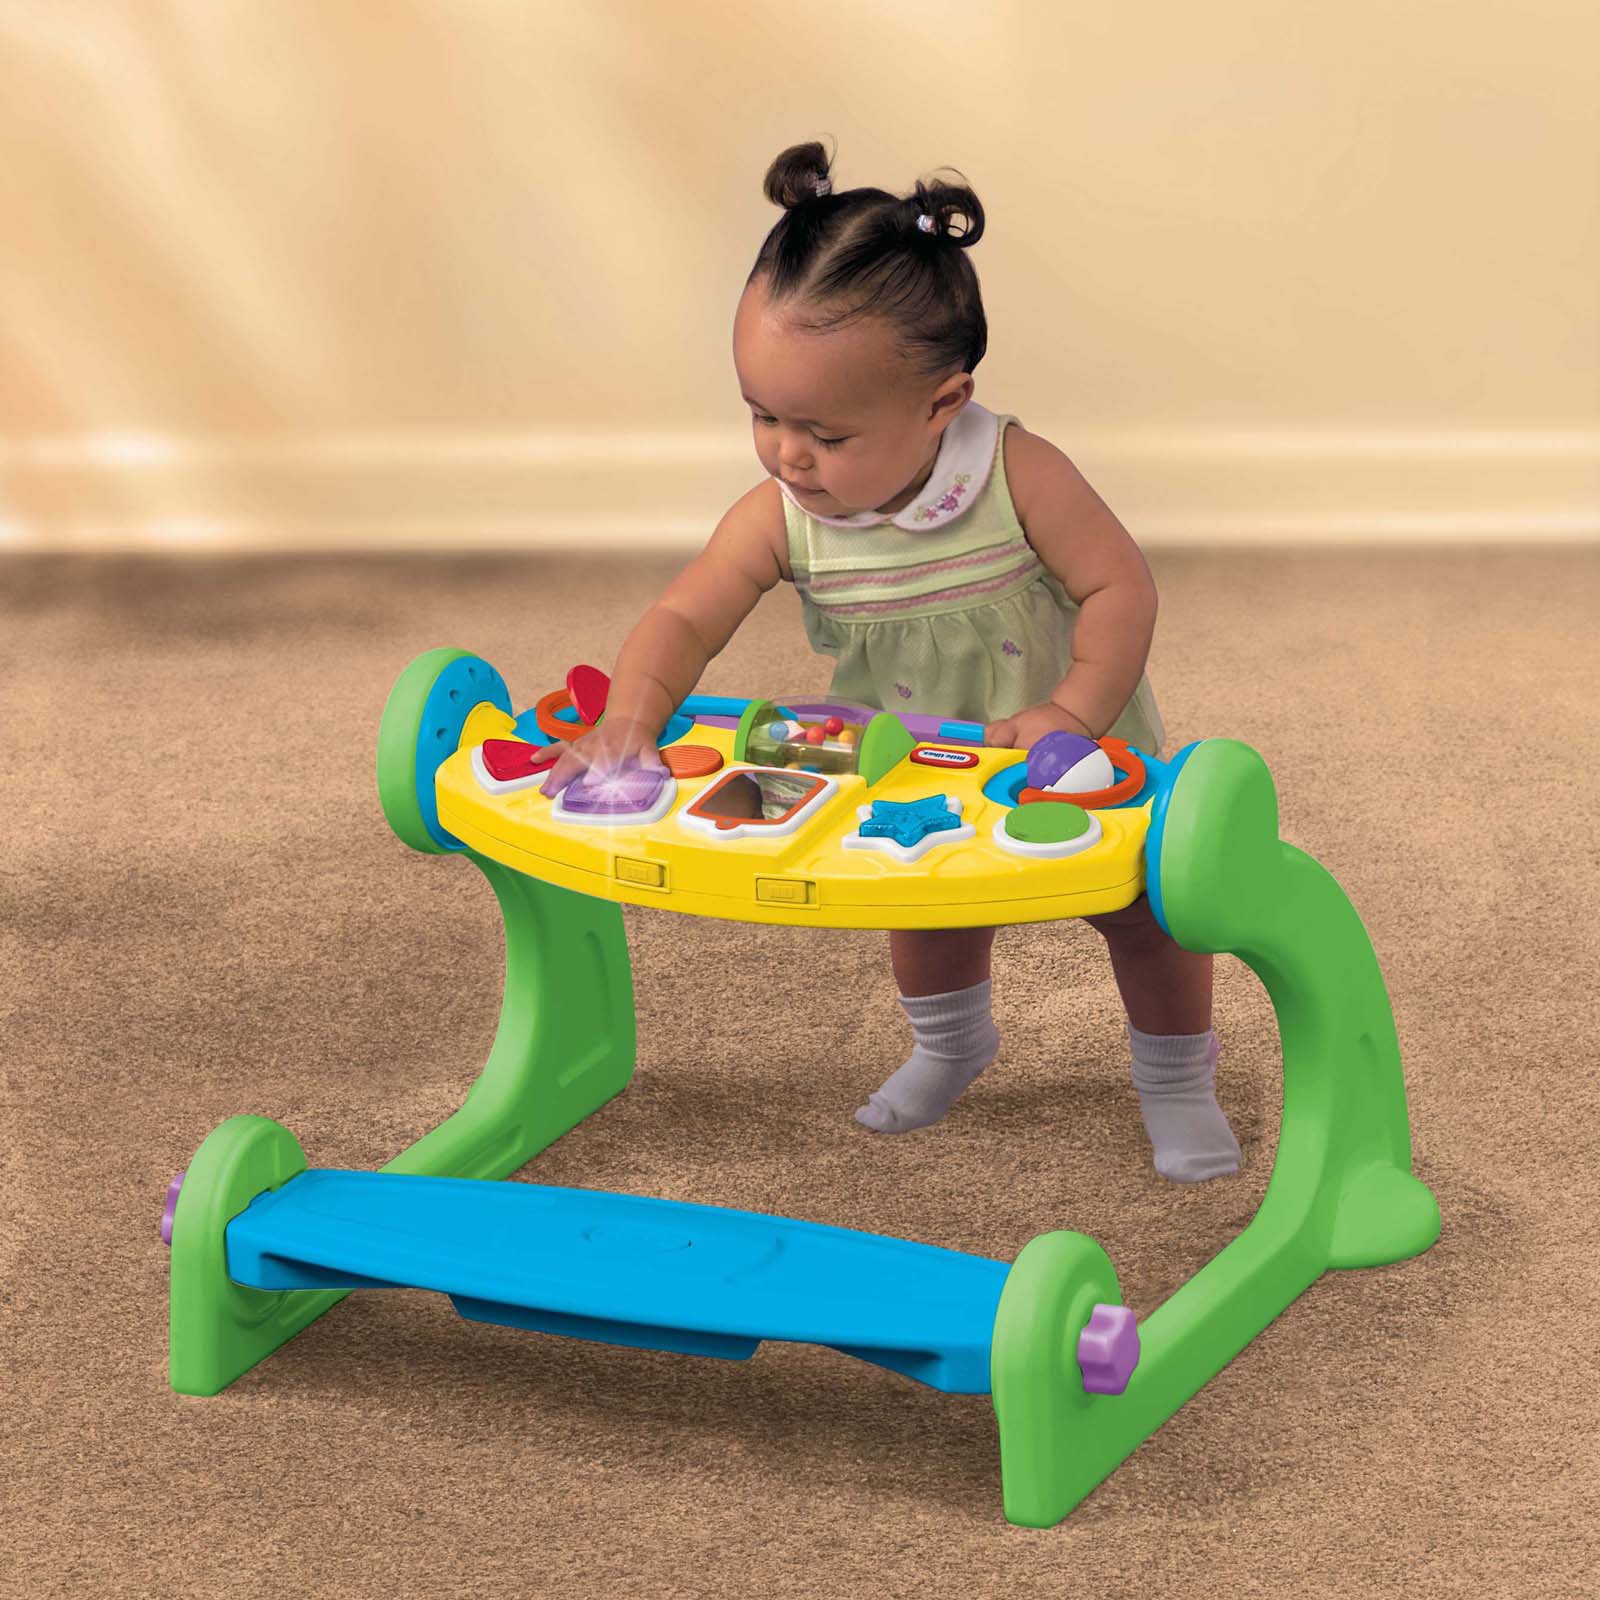 Little Tikes 5-In-1 Adjustable Gym - image 4 of 5